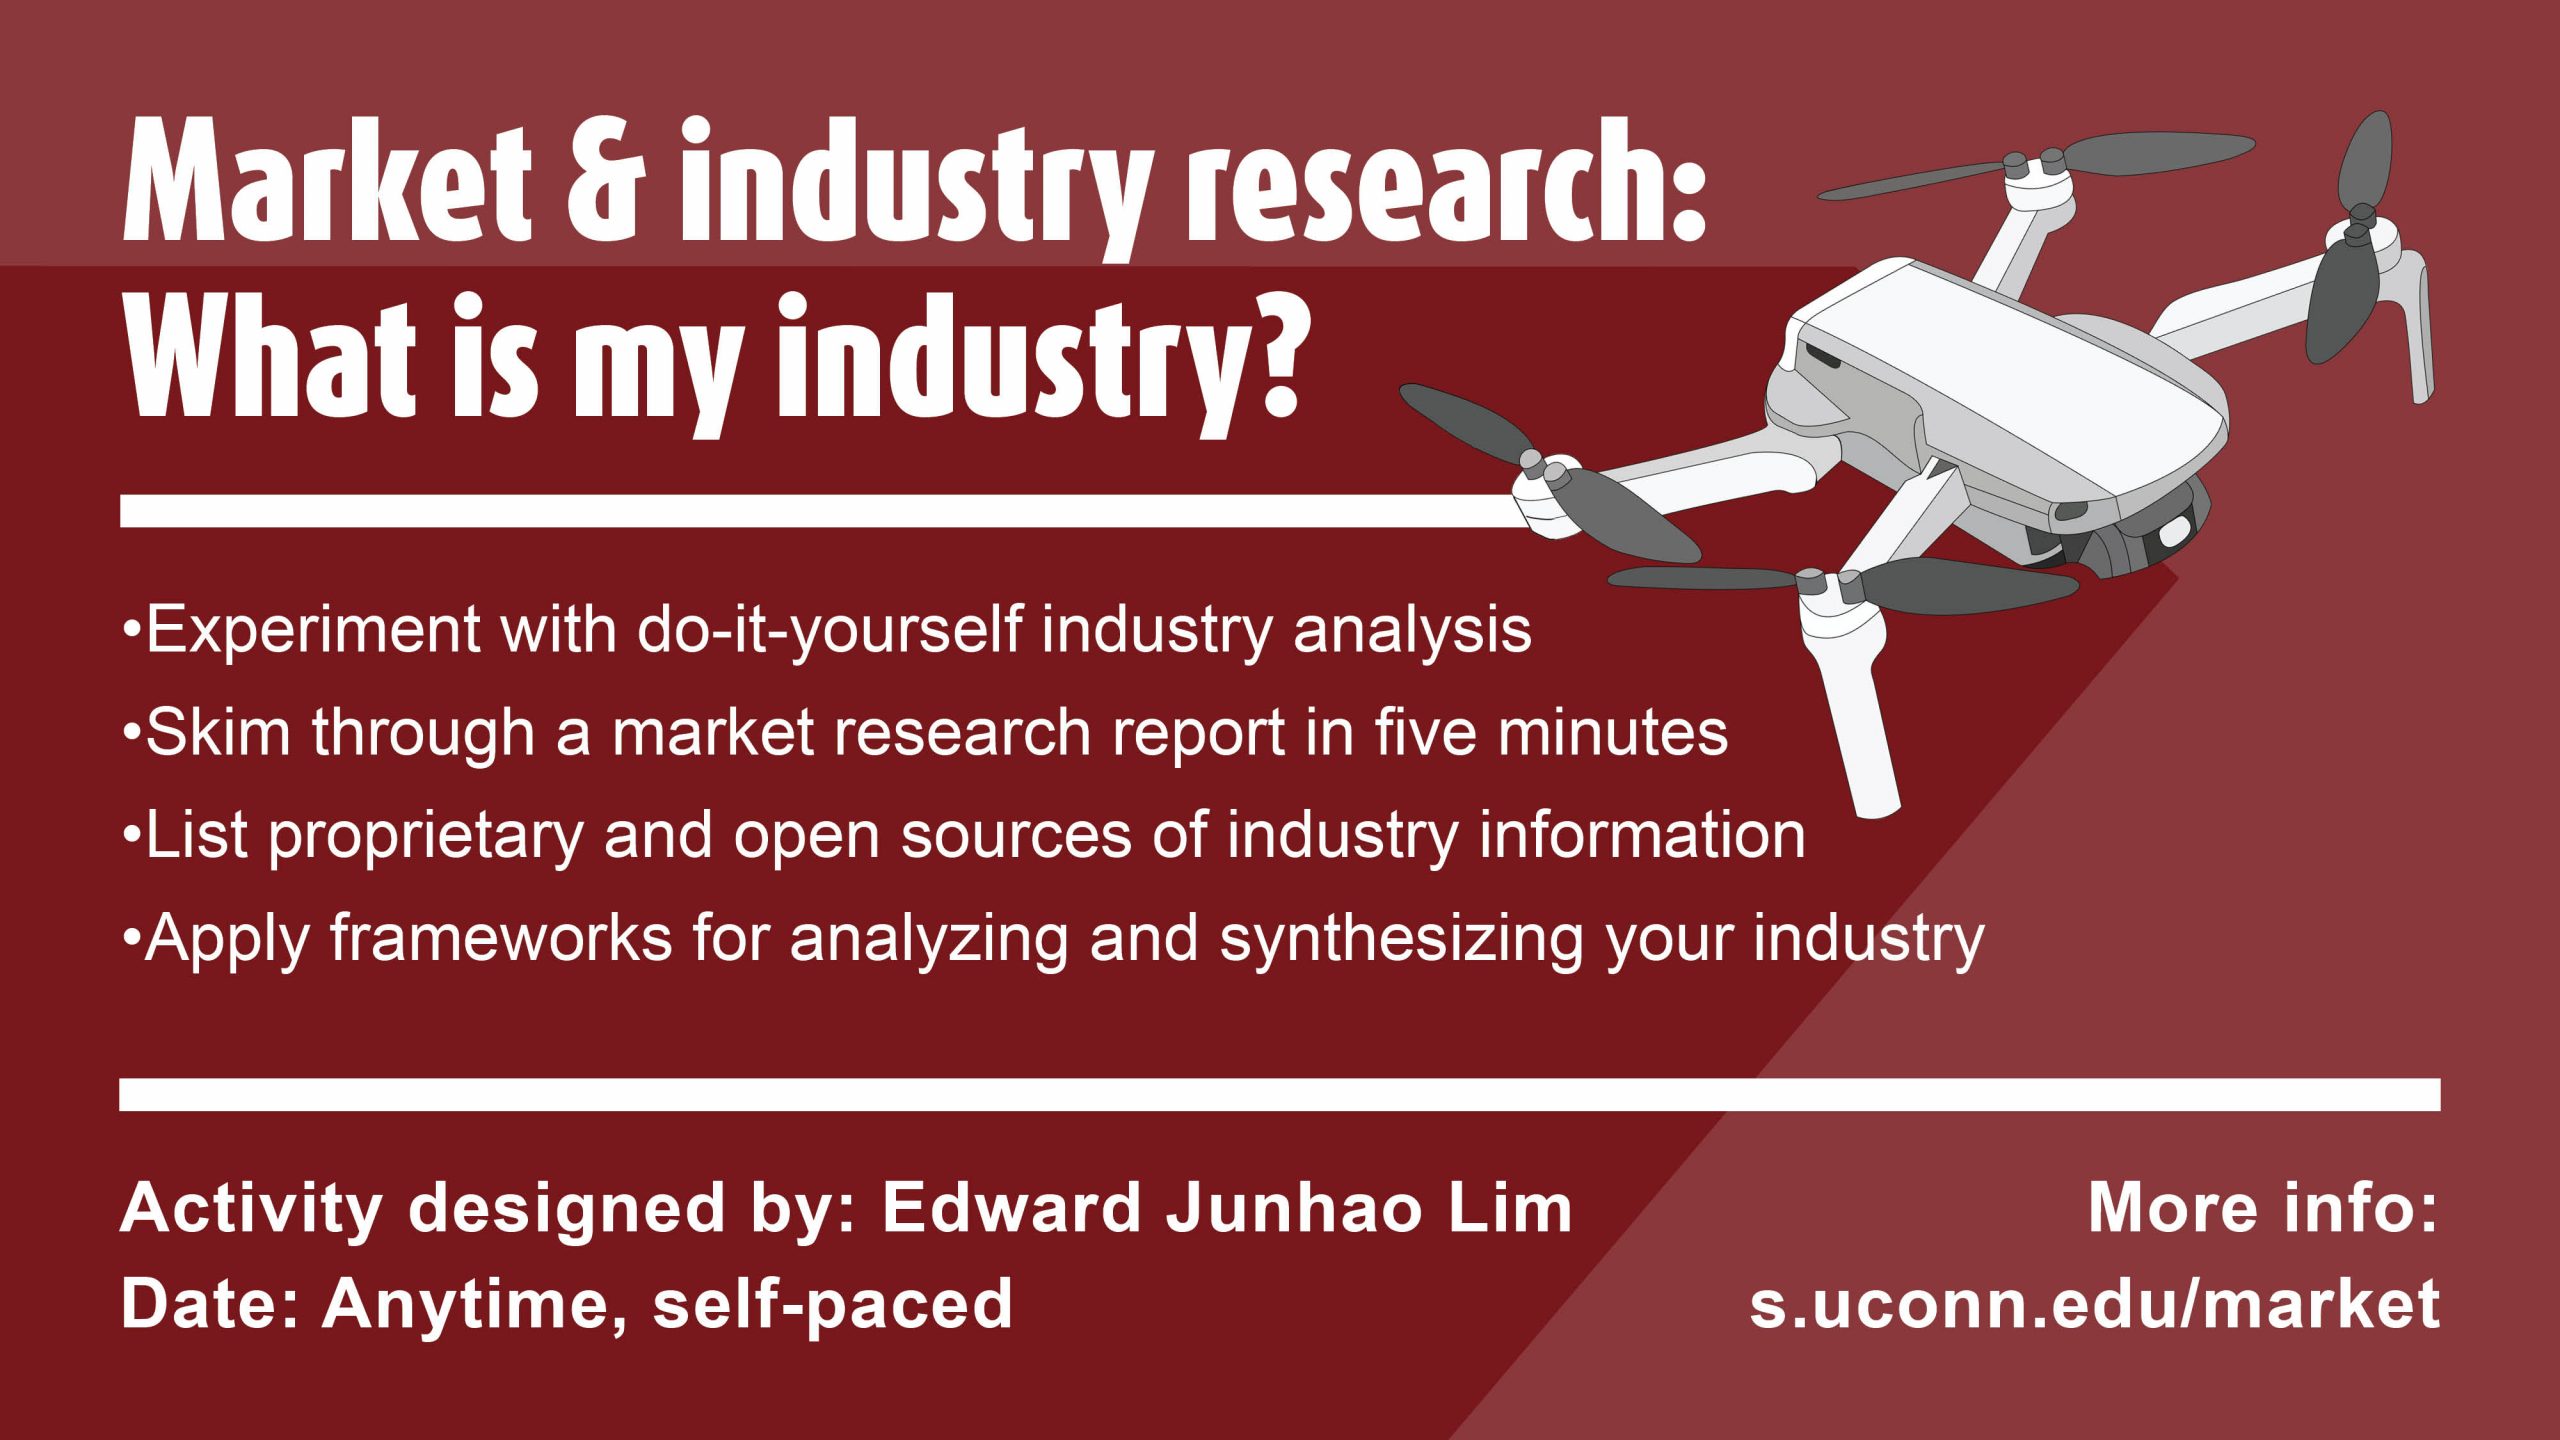 Market & industry research: What is my industry? Experiment with do-it-yourself industry analysis Skim through a market research report in five minutes List proprietary and open sources of industry information Apply frameworks for analyzing and synthesizing your industry Activity designed by: Edward Junhao Lim Date: Anytime, self-paced More info: s.uconn.edu/market - text is accompanied by illustration of a drone